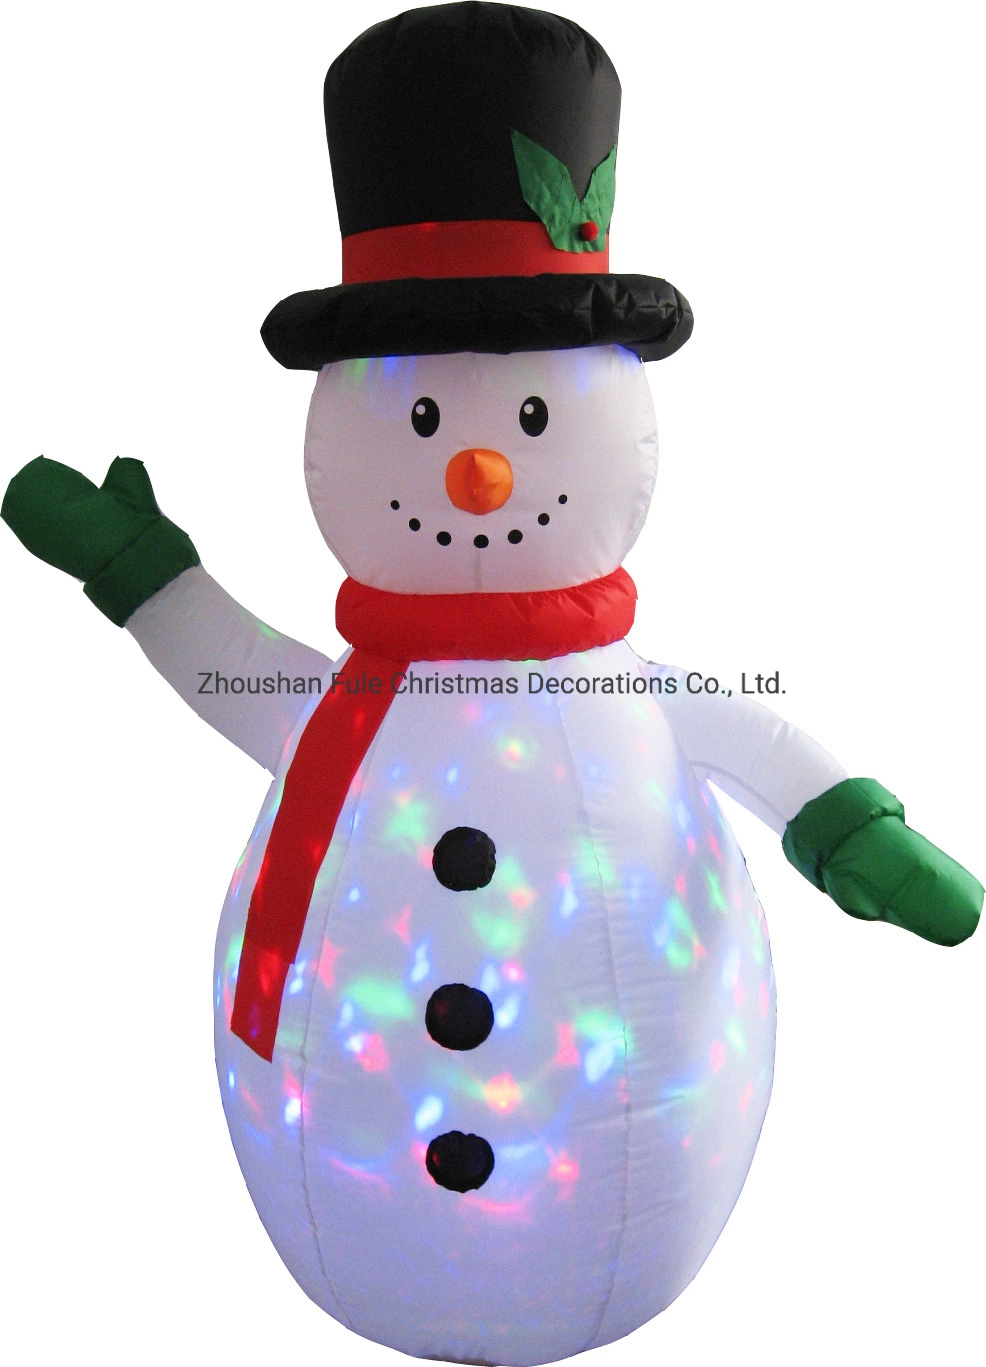 Air Blown Inflatable Snomwan with Swirling Projection Lighting for Christmas Decor.